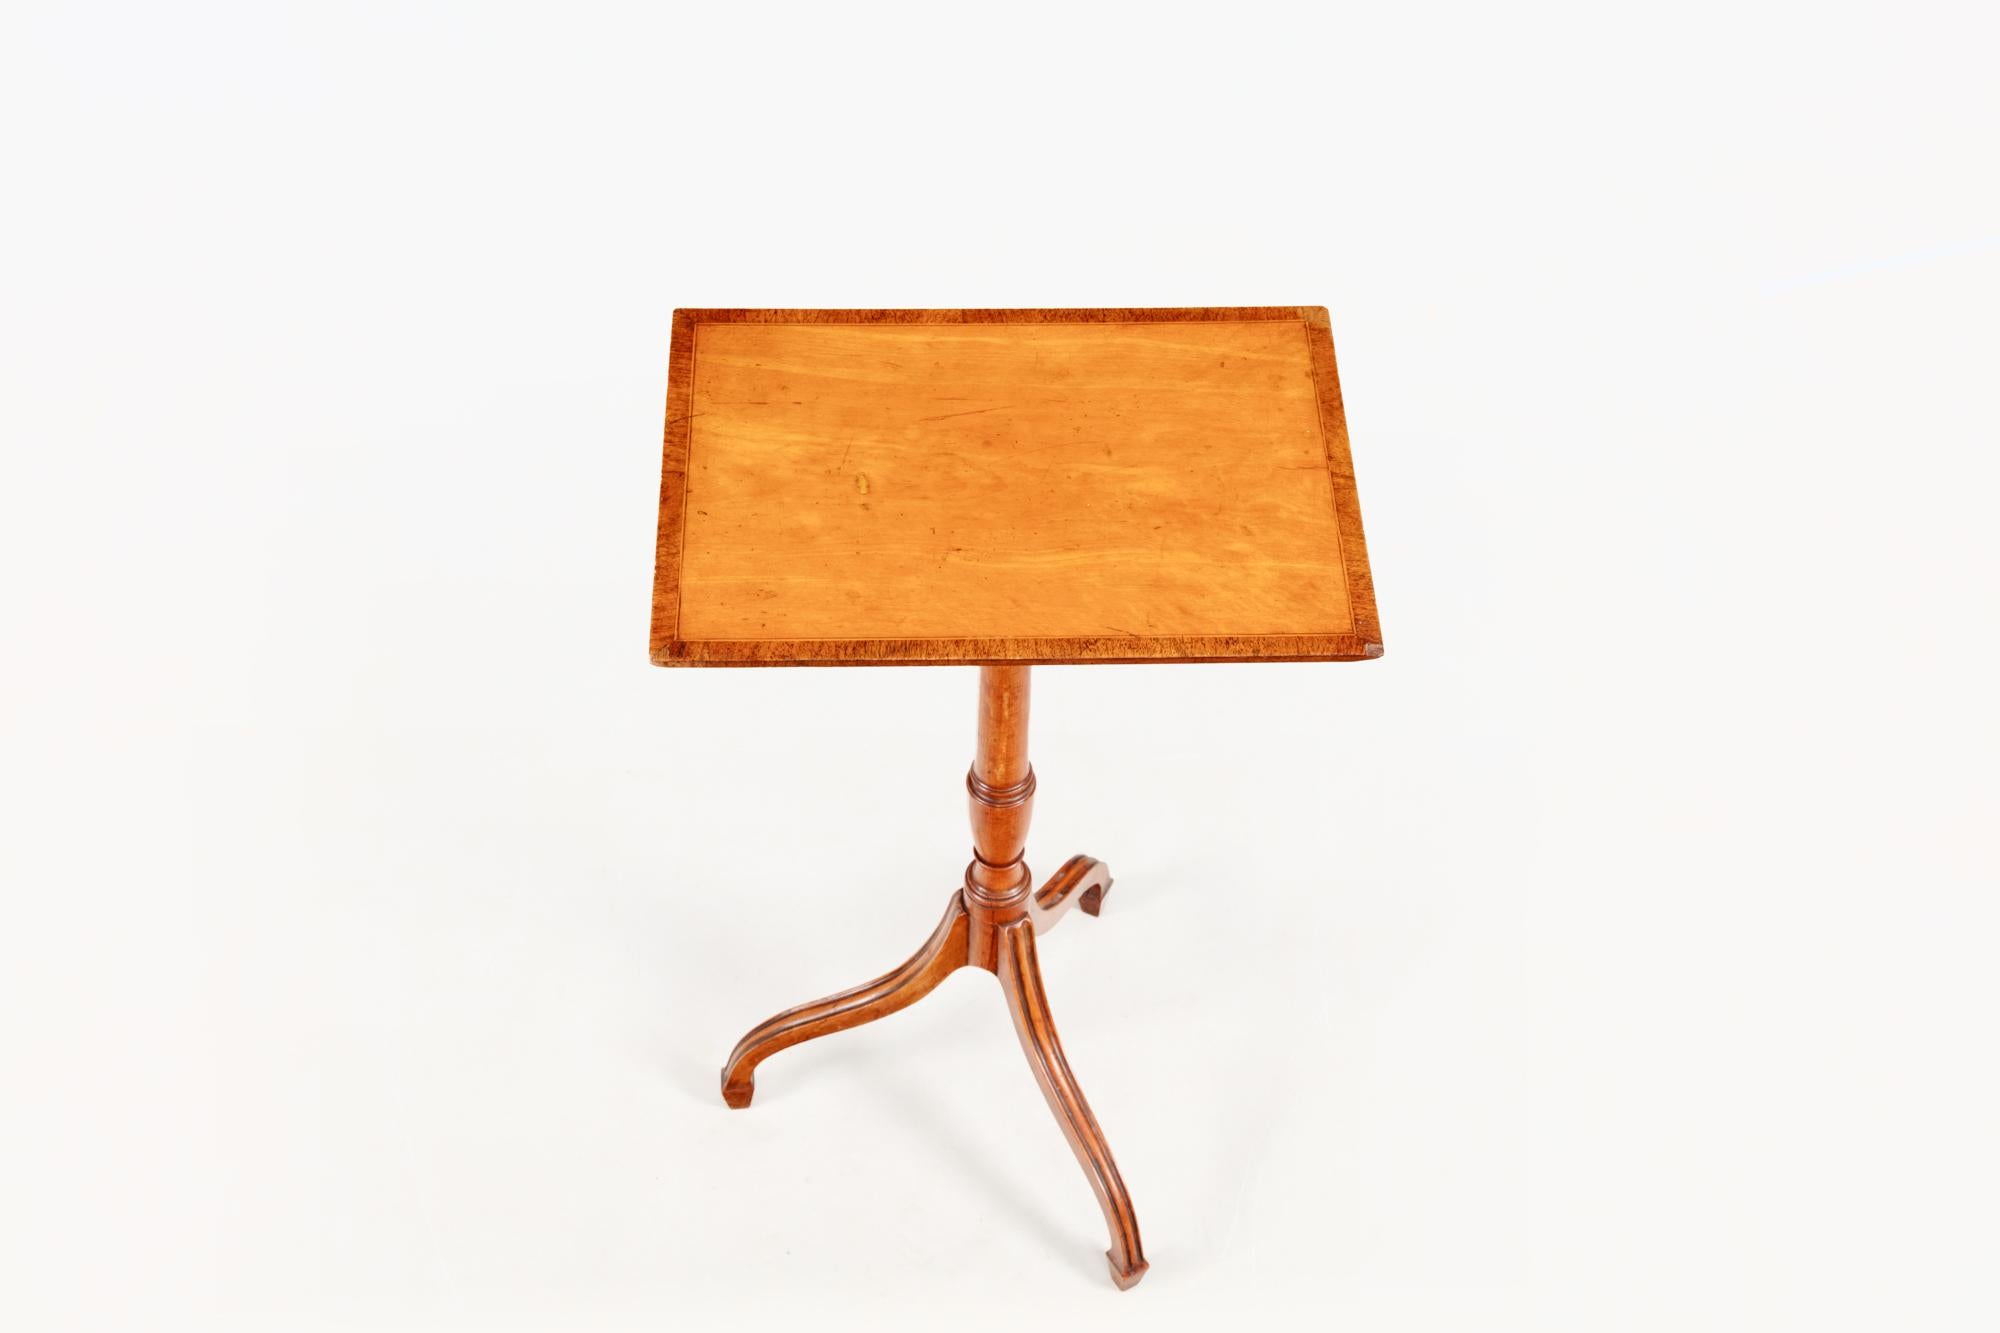 Early 19th century Regency tripod wine table. The rectangular satinwood and mahogany crossbanded top sits above a turned stem that splays out into three downswept tapering legs, terminating in simple spade feet.